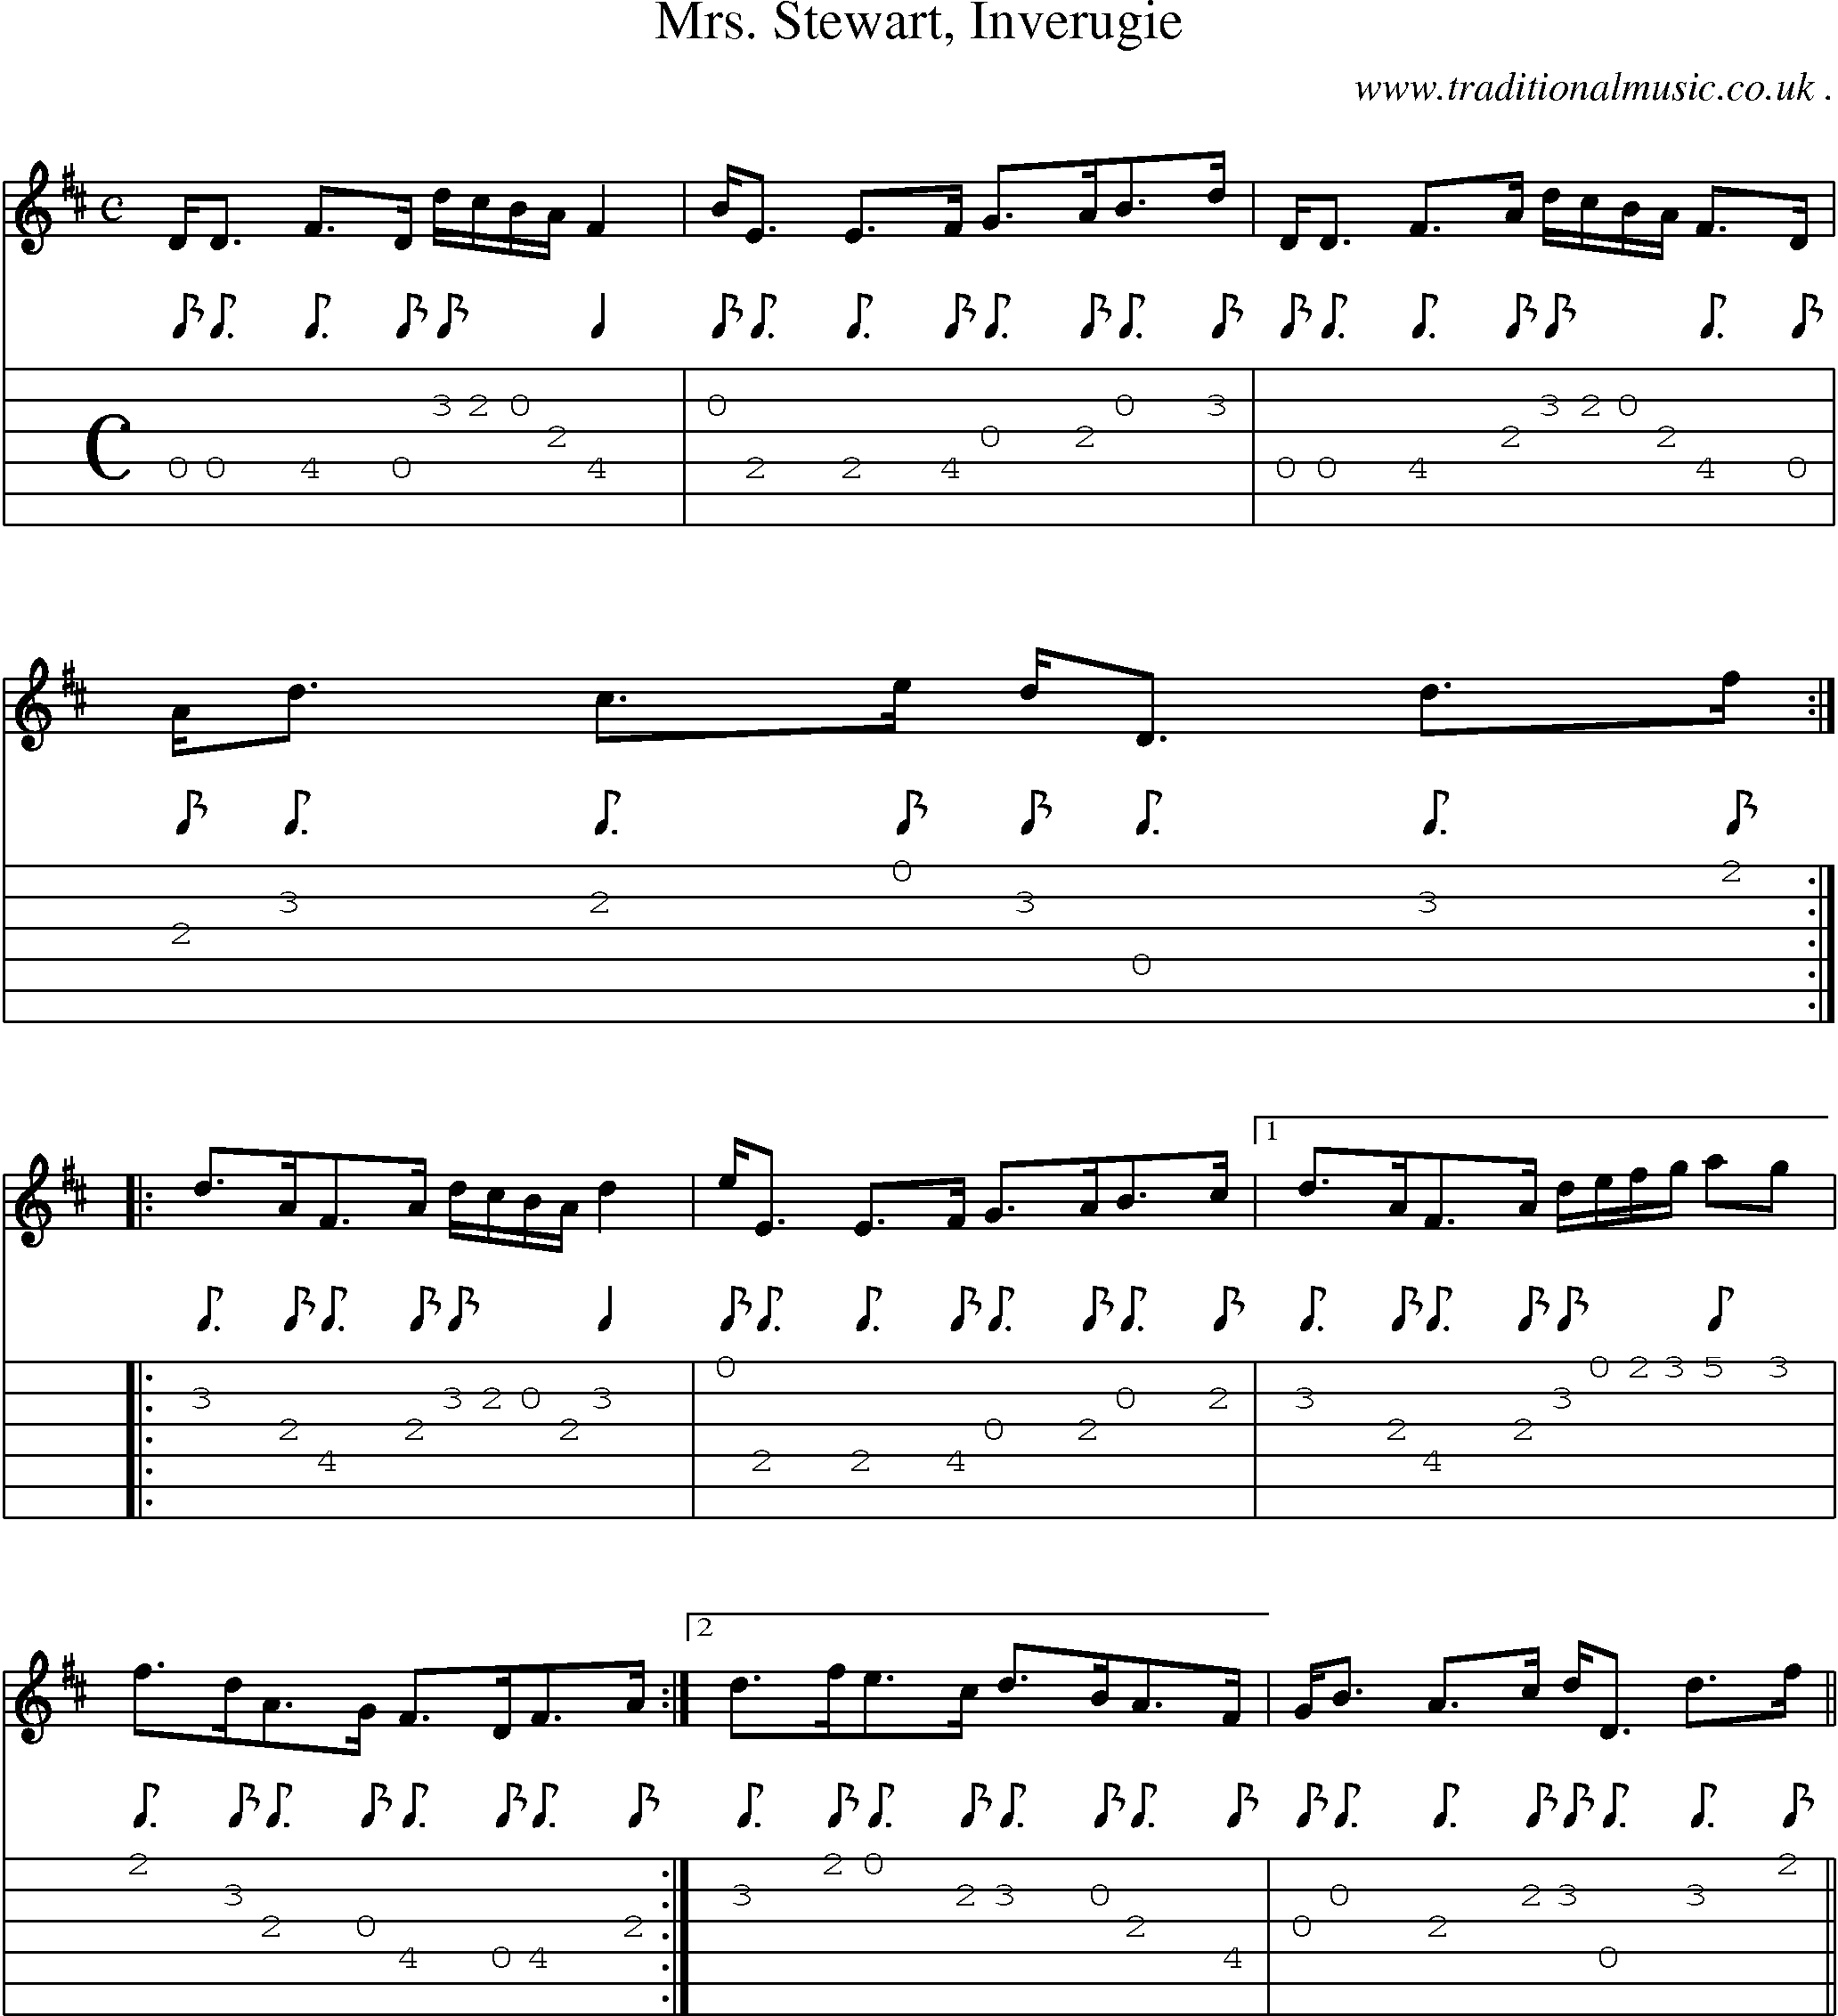 Sheet-music  score, Chords and Guitar Tabs for Mrs Stewart Inverugie